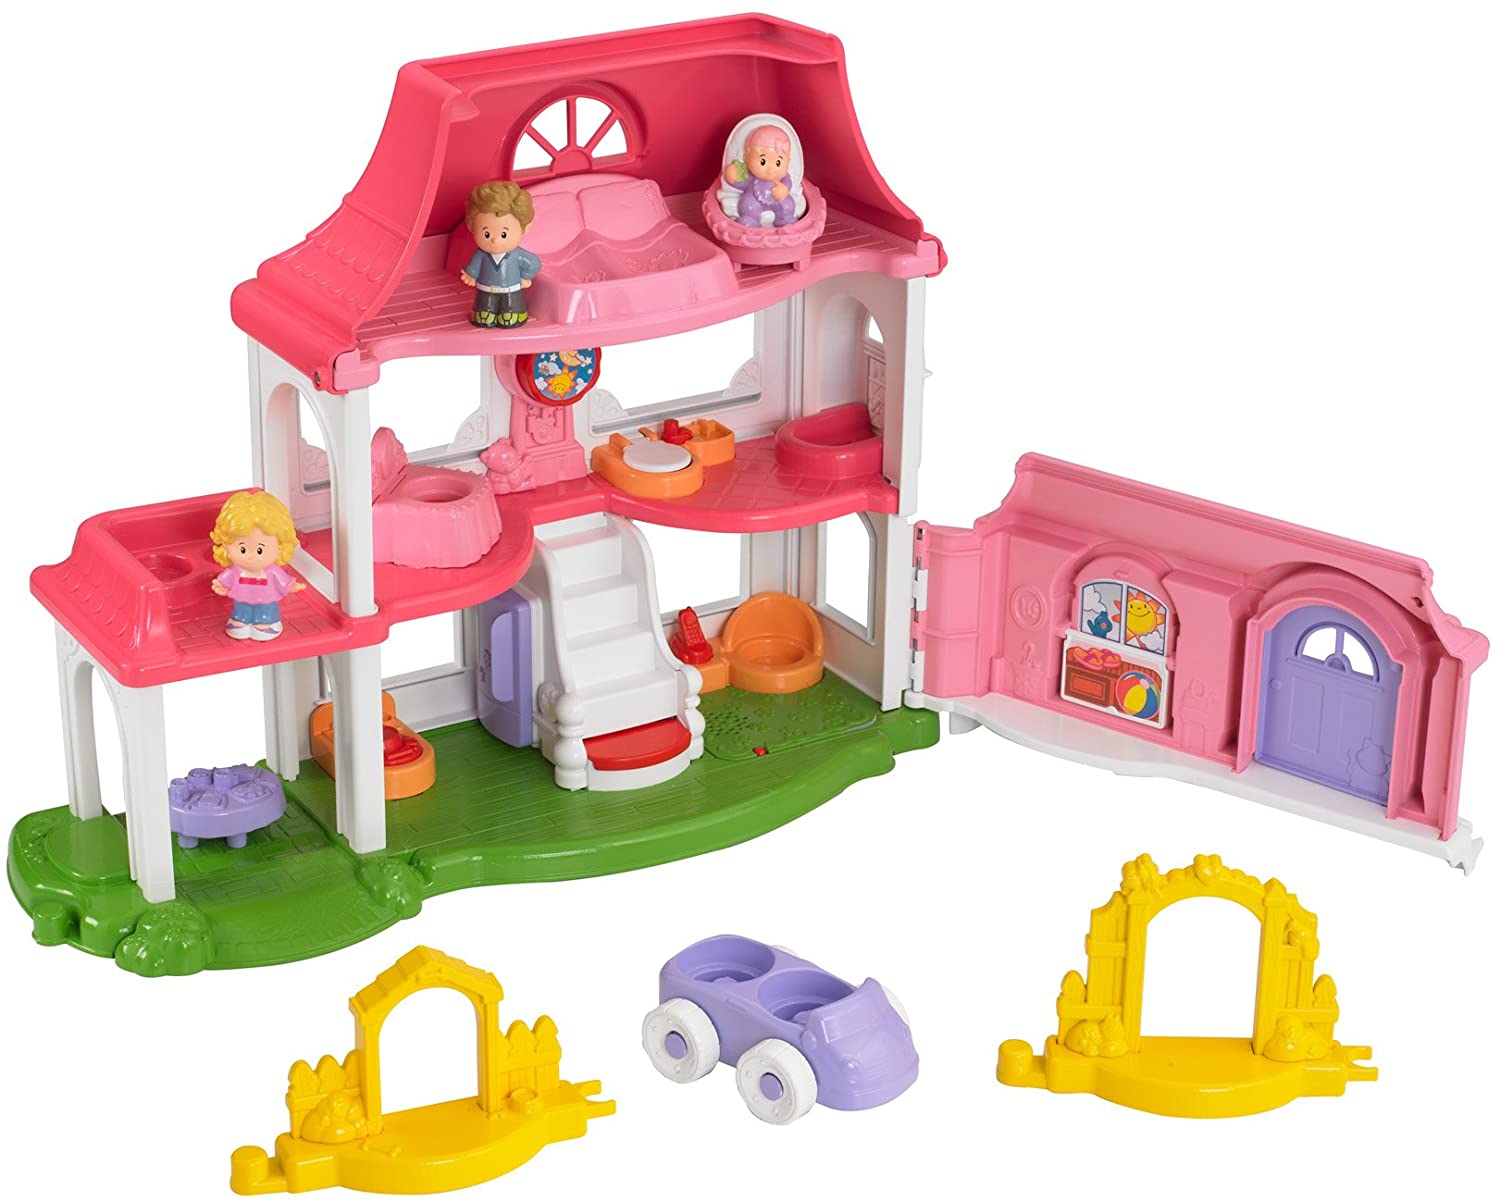 9 Best Fisher Price Dollhouse Reviews of 2023 3